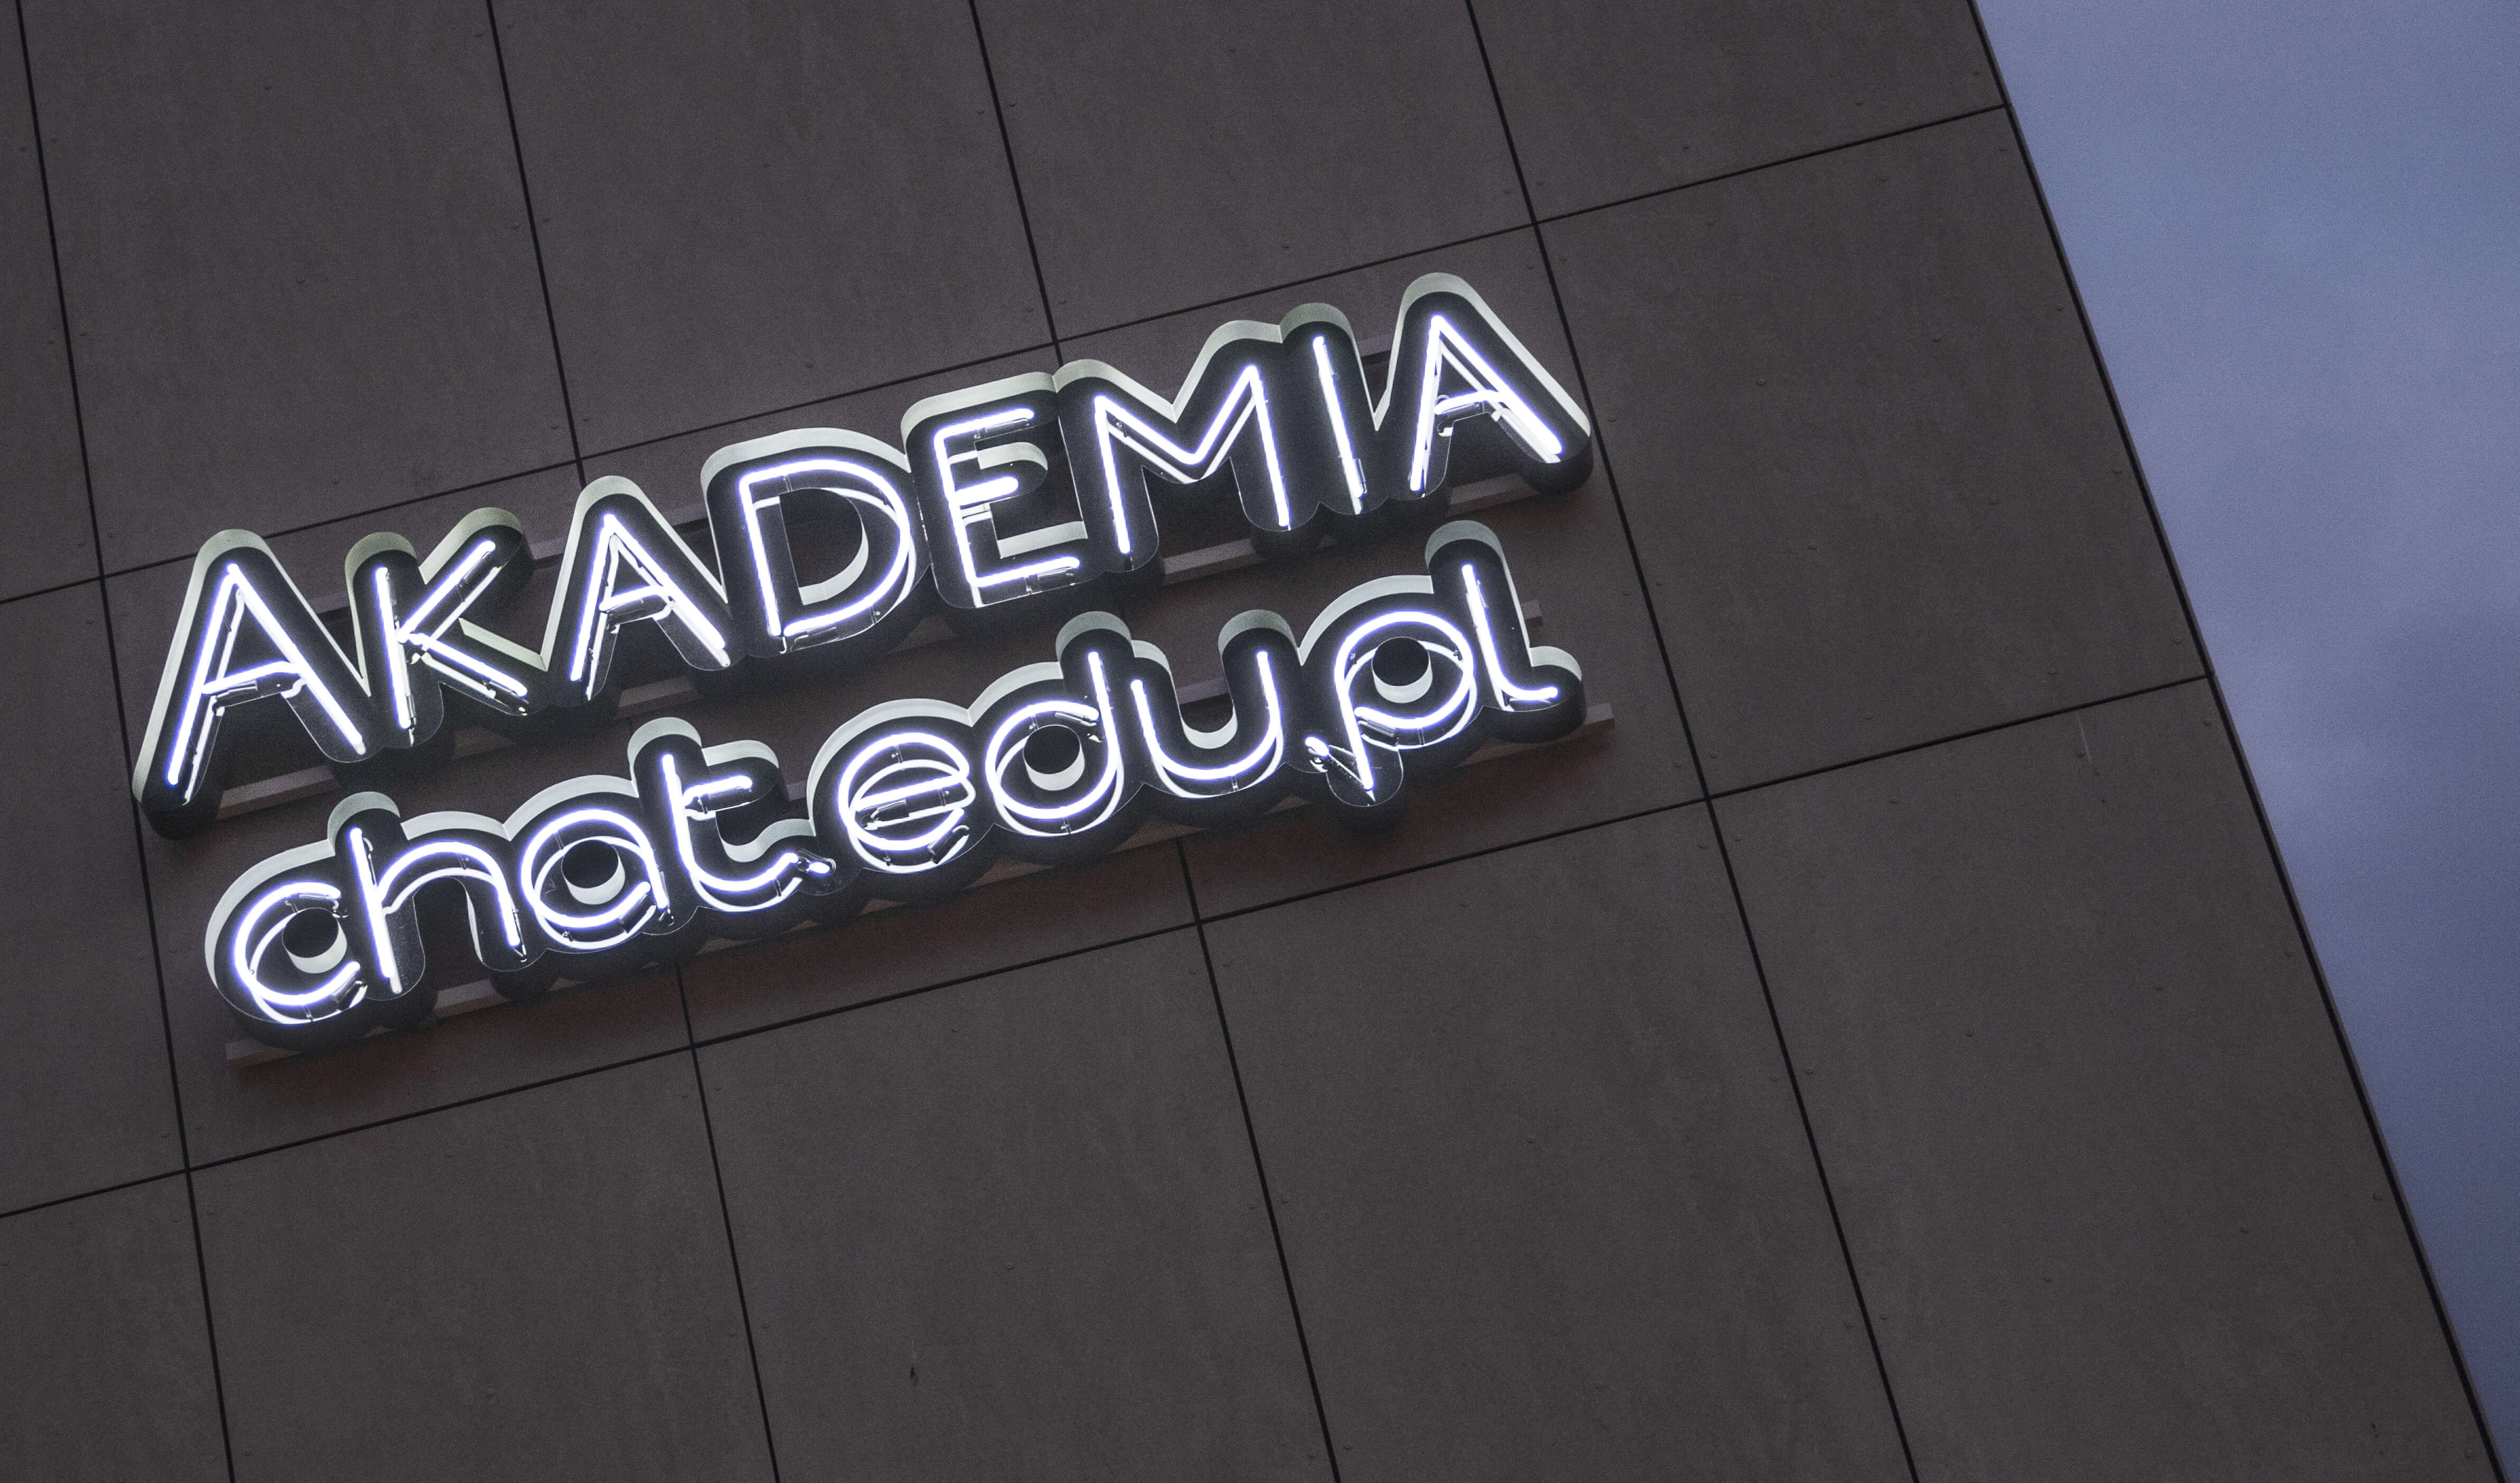 Academy Chat edu - neon-academy-chat-edu-warsaw-neon-producer-neon-on-the-building-front elevation-neon-at-height-luminescent-neon-order-neon-on-the-exterior-of-the-building-logo-neon letters-neon-university